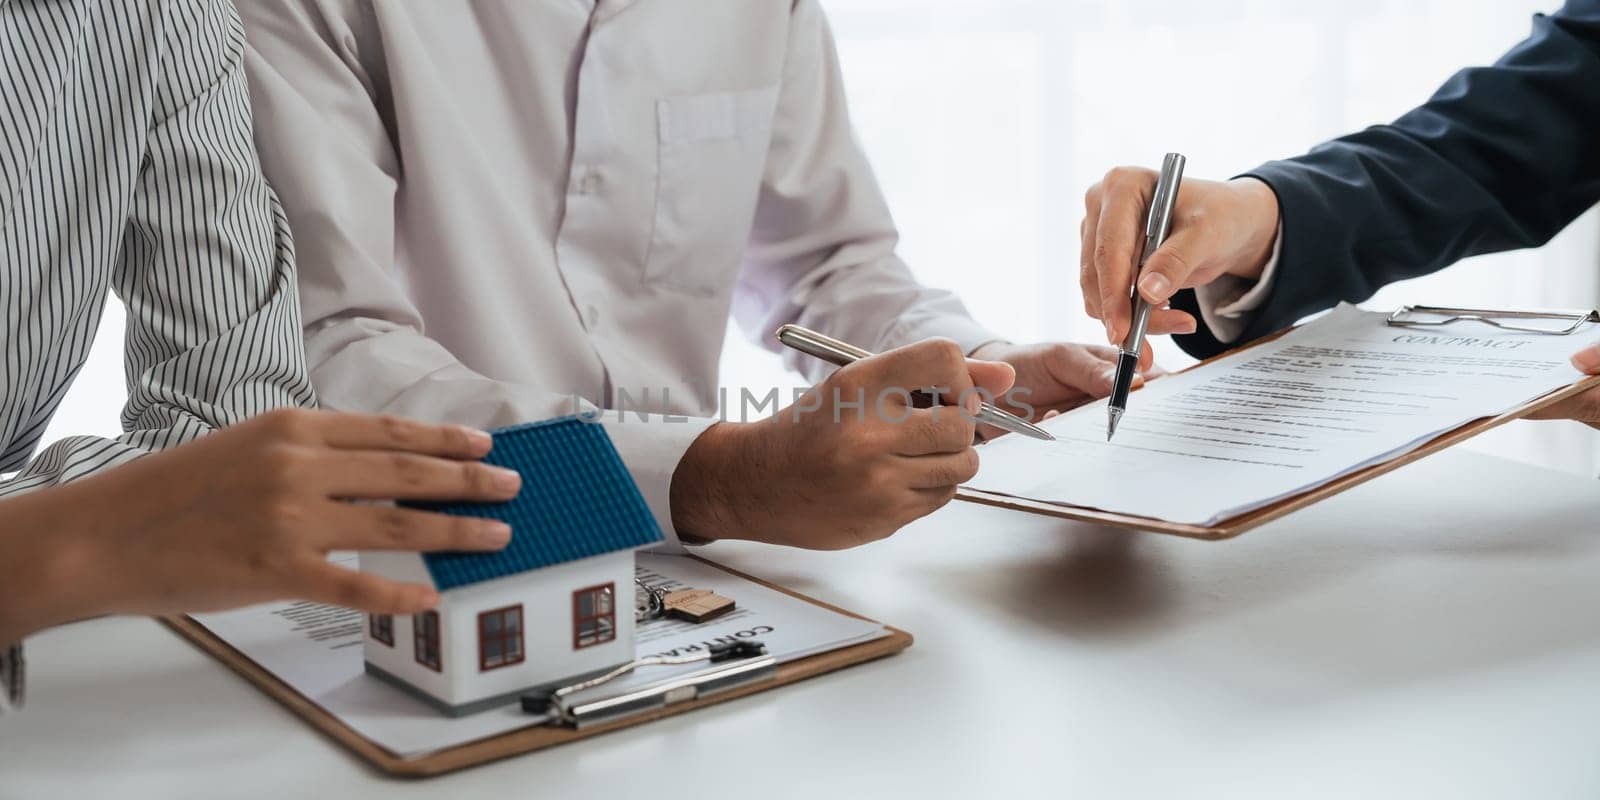 Happy couple signing a contract with real estate agent. renters tenants sign mortgage loan investment agreement or rental insurance contract meeting realtor lender landlord making real estate sale purchase deal.